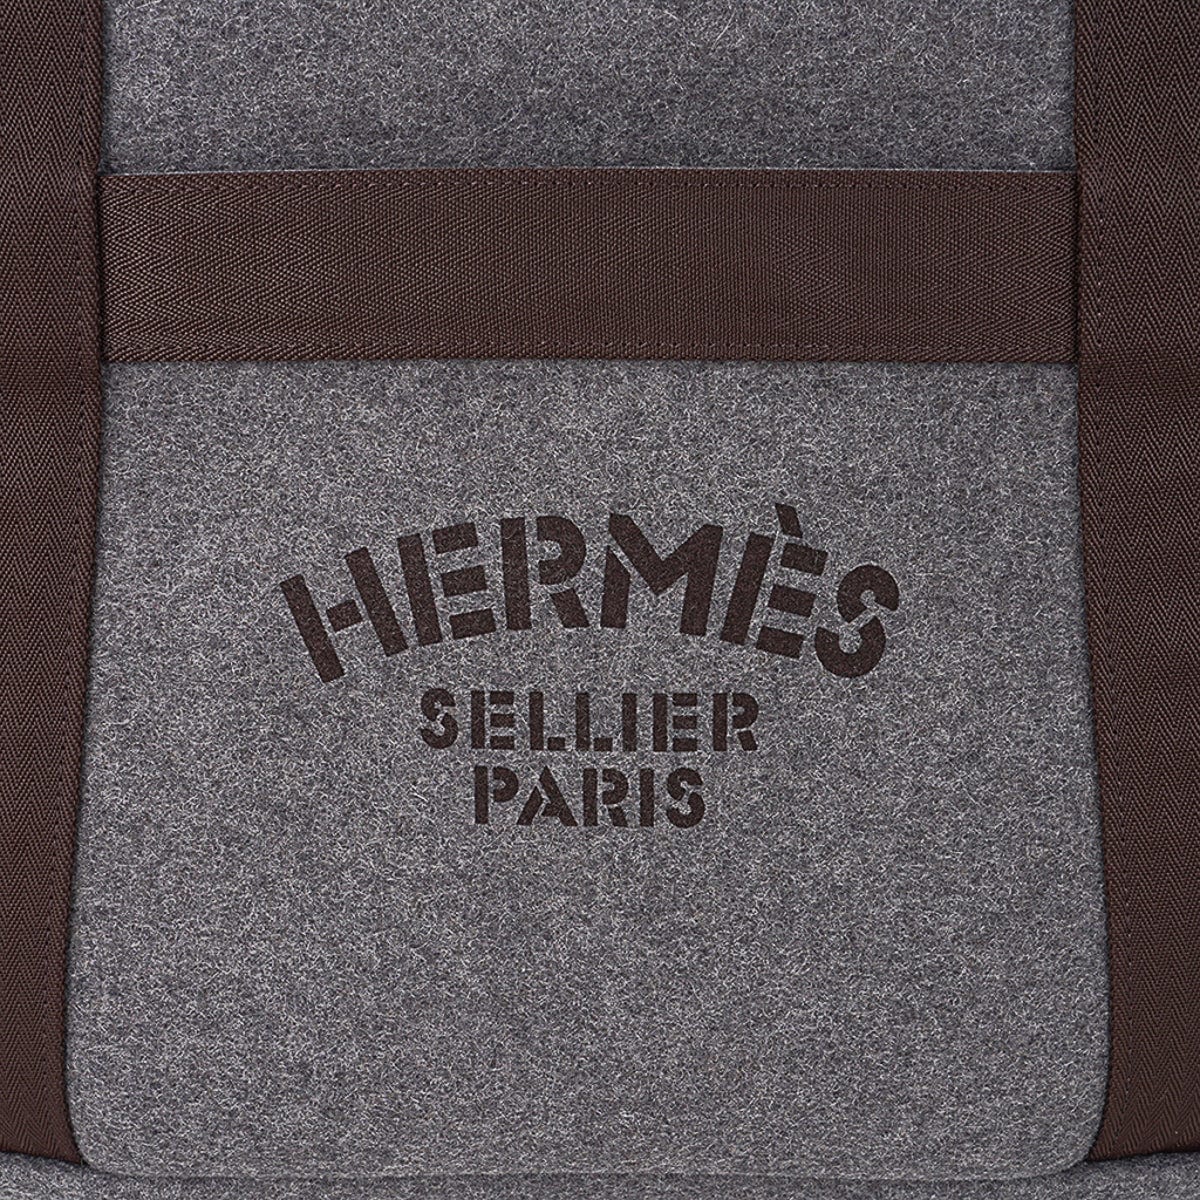 Hermes Watch Case Gray Color Fabric with Outer Box